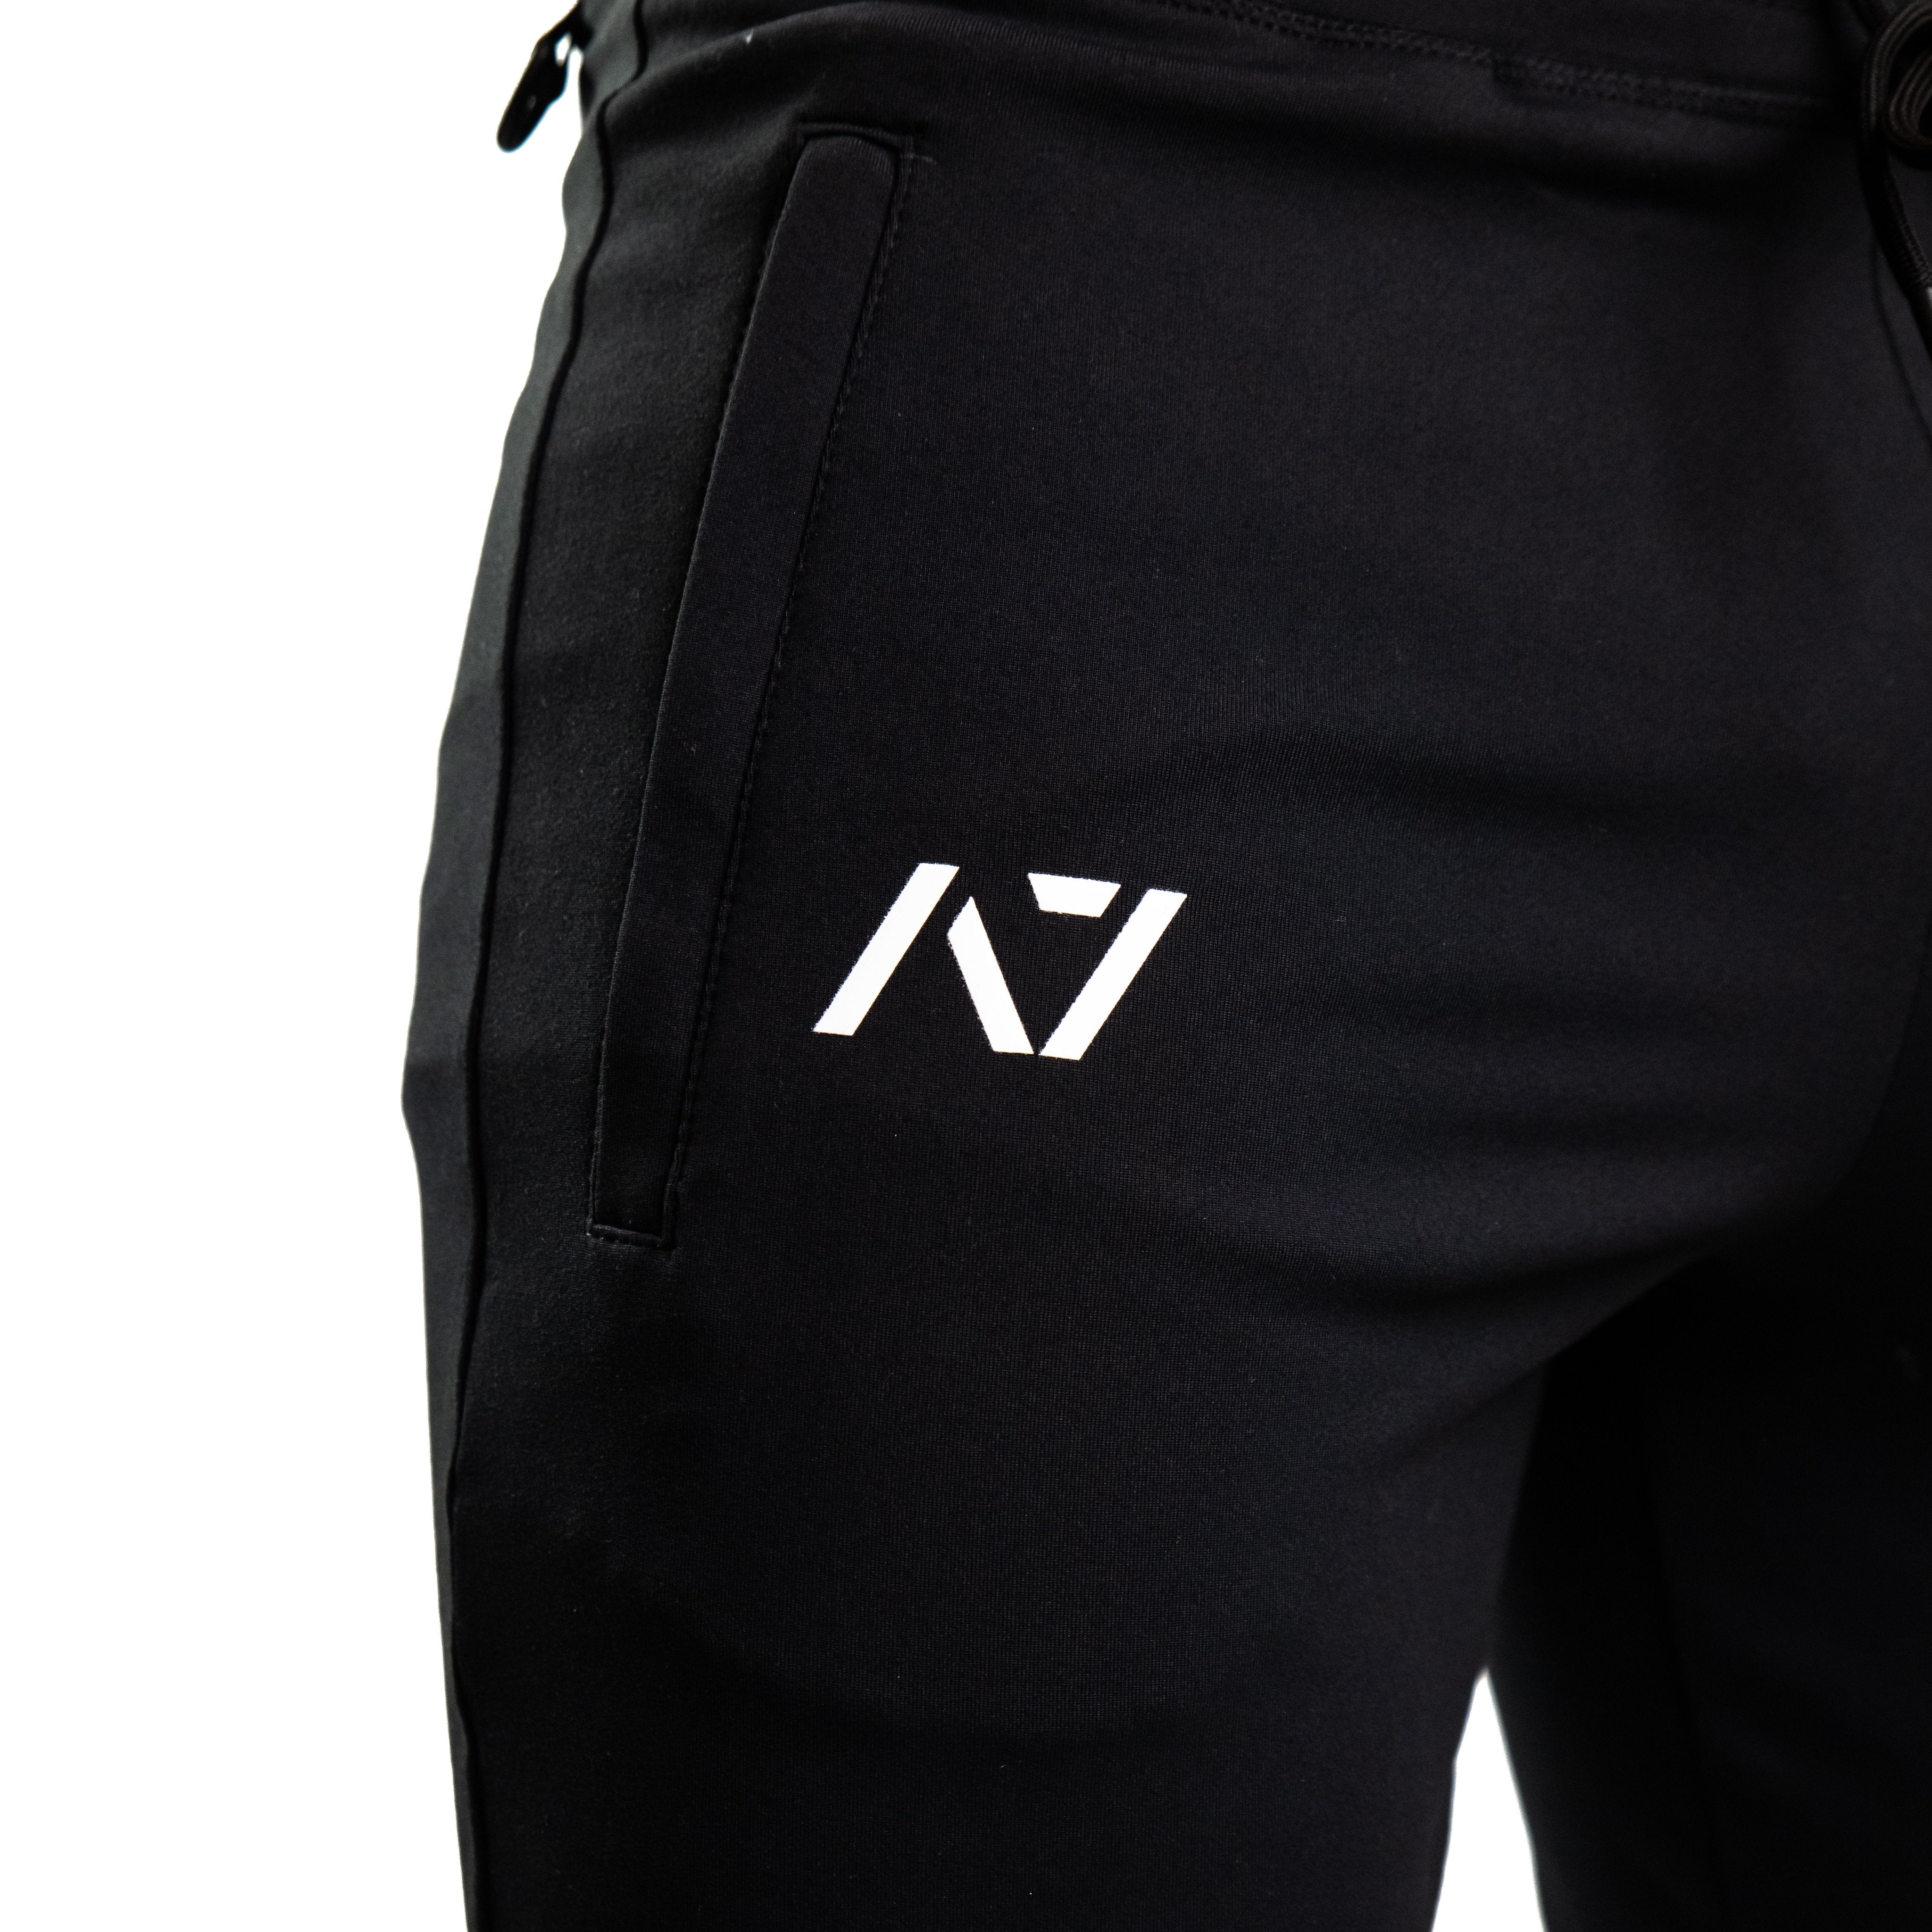 Defy Joggers have likely become a staple in your wardrobe. With our newest Monochrome design colourway we set out to provide a unique yet simple monochrome colour combo to match with all the stealth, gray, white and even more poppy colours of your current collection or many of the pieces we have available.